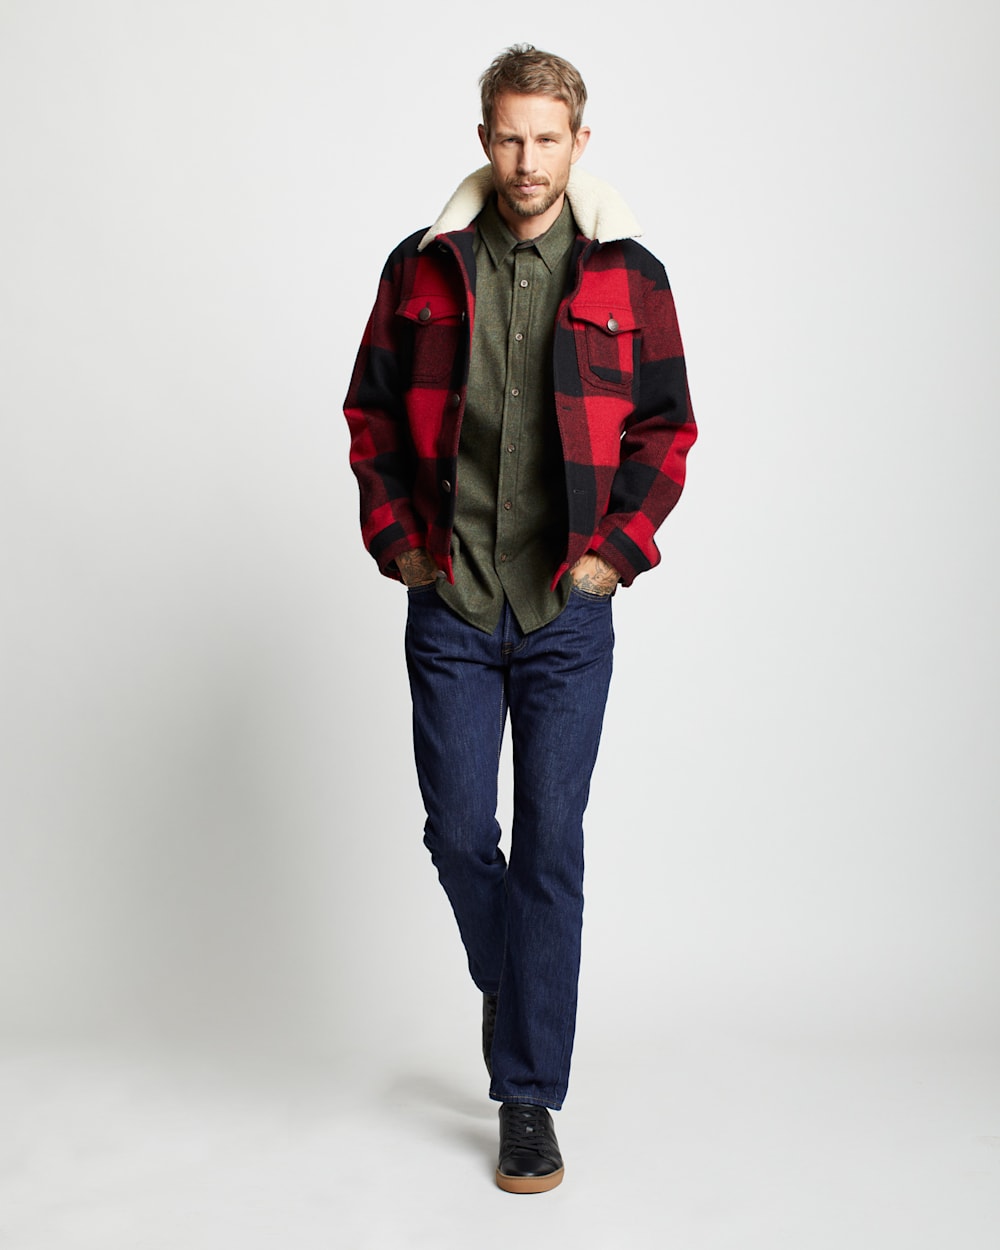 ALTERNATE VIEW OF MEN'S WOOL STADIUM CLOTH PLAID TRUCKER COAT IN RED/BLACK BUFFALO CHECK image number 6